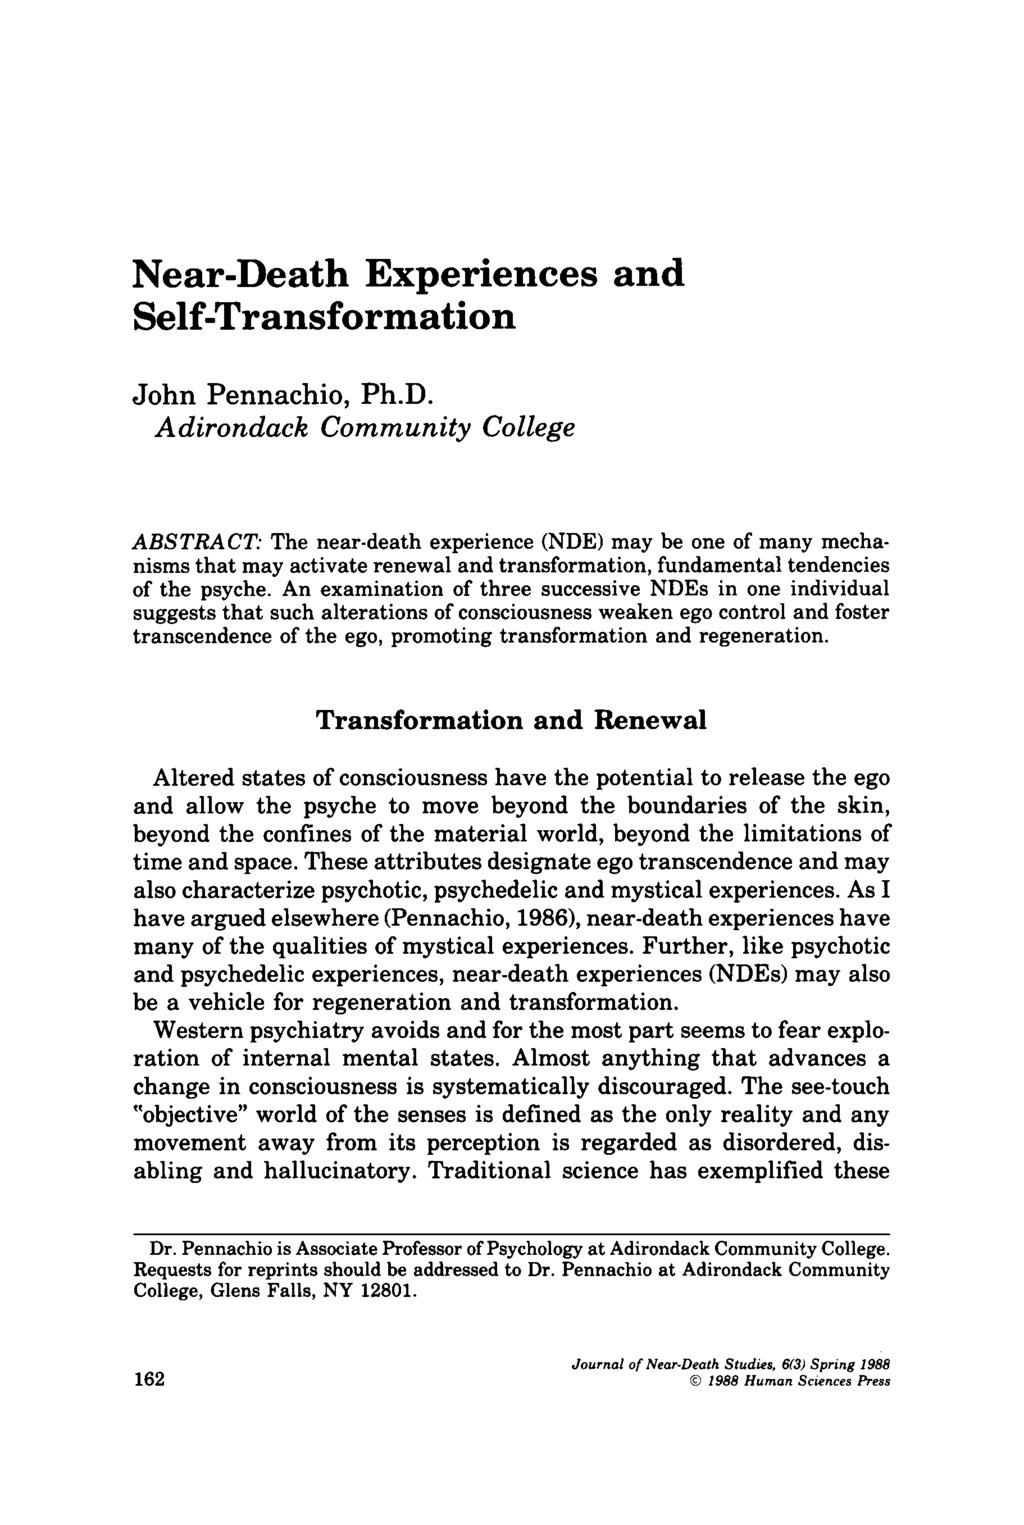 Near-Death Experiences and Self-Transformation John Pennachio, Ph.D. Adirondack Community College ABSTRACT: The near-death experience (NDE) may be one of many mecha nisms that may activate renewal and transformation, fundamental tendencies of the psyche.